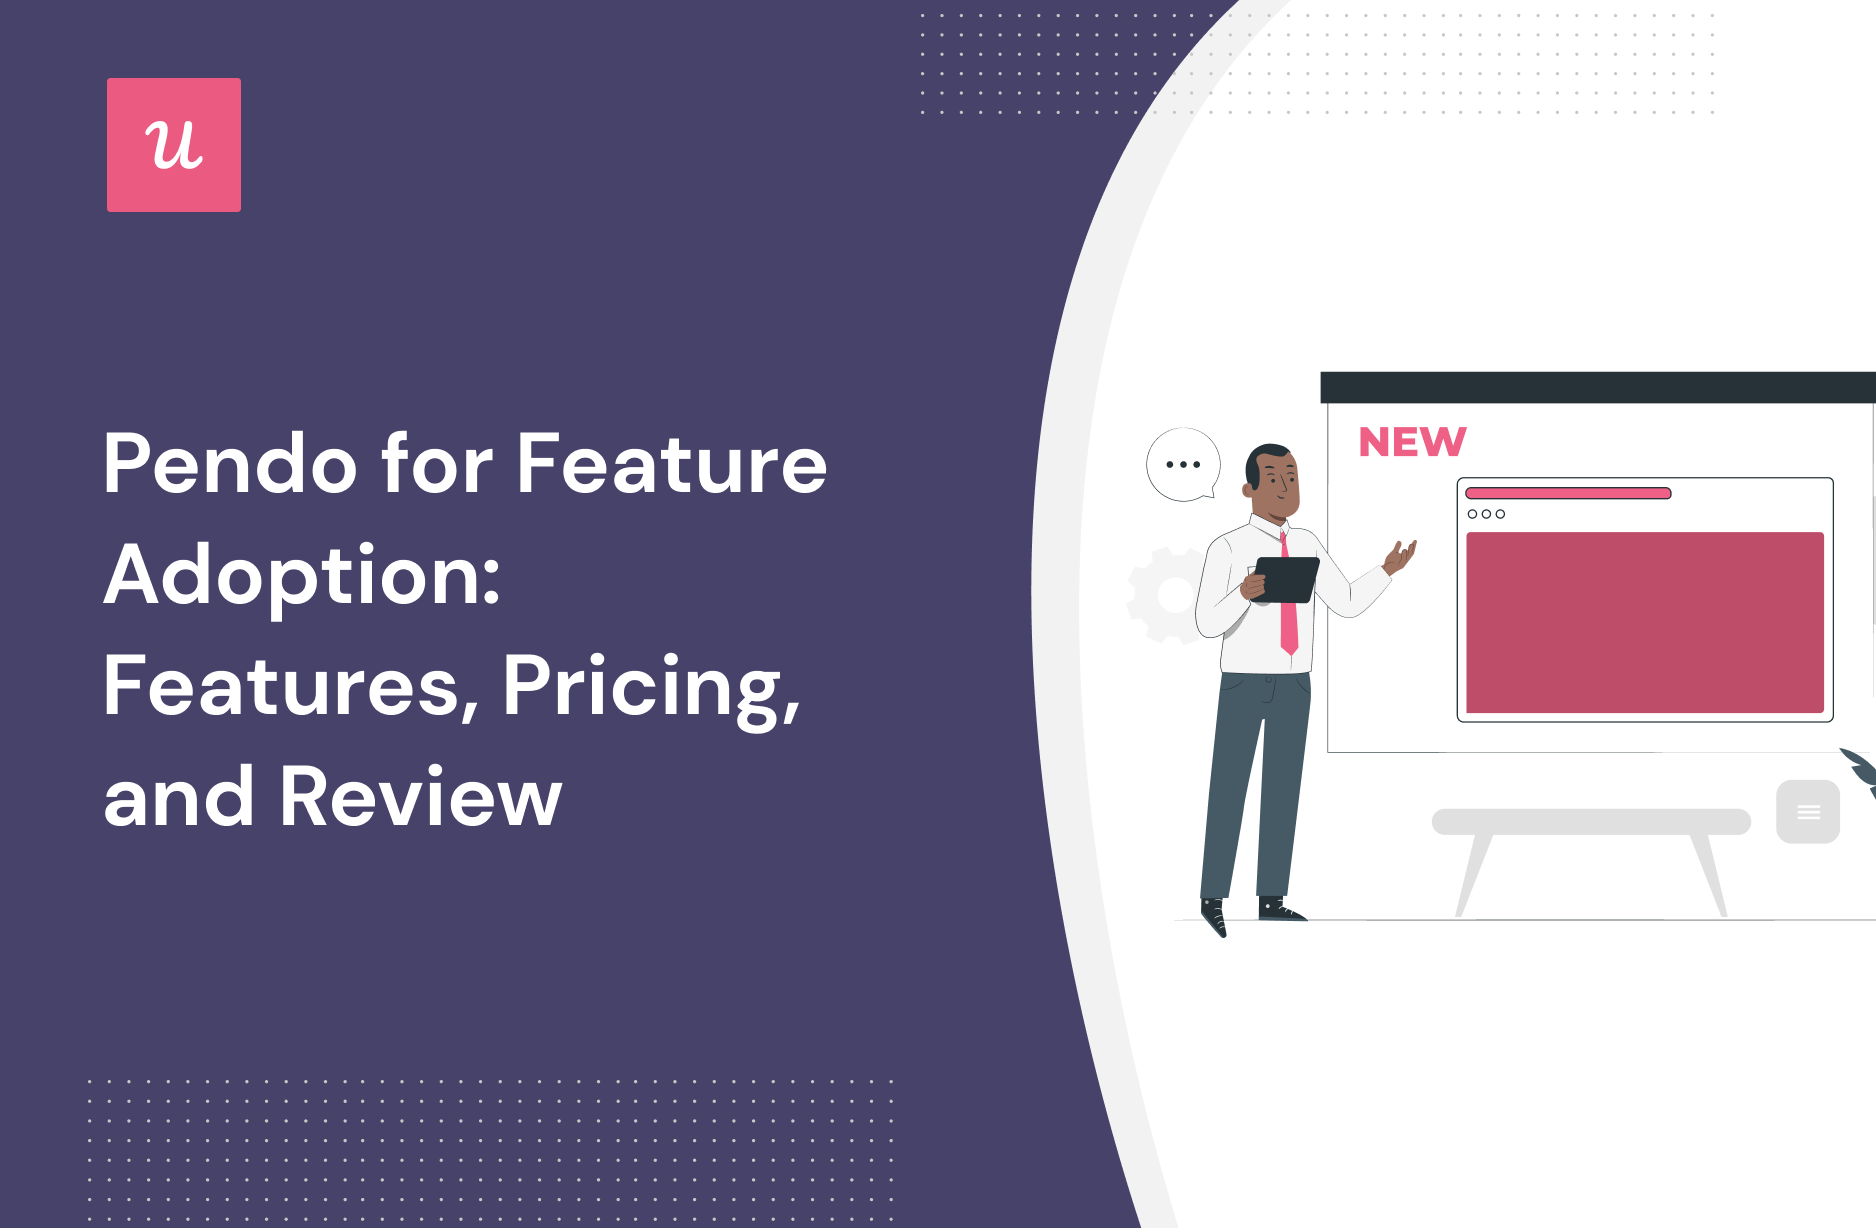 Pendo for Feature Adoption: Features, Pricing, and Review